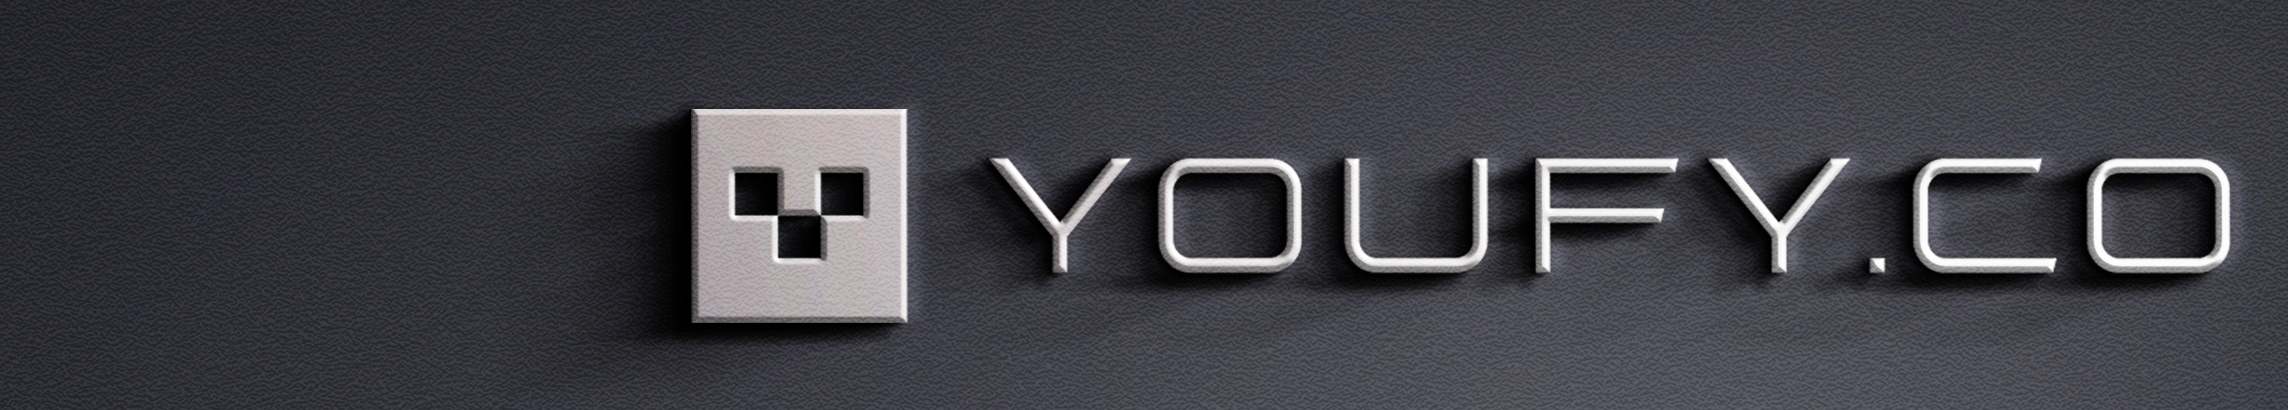 Youfy co's profile banner